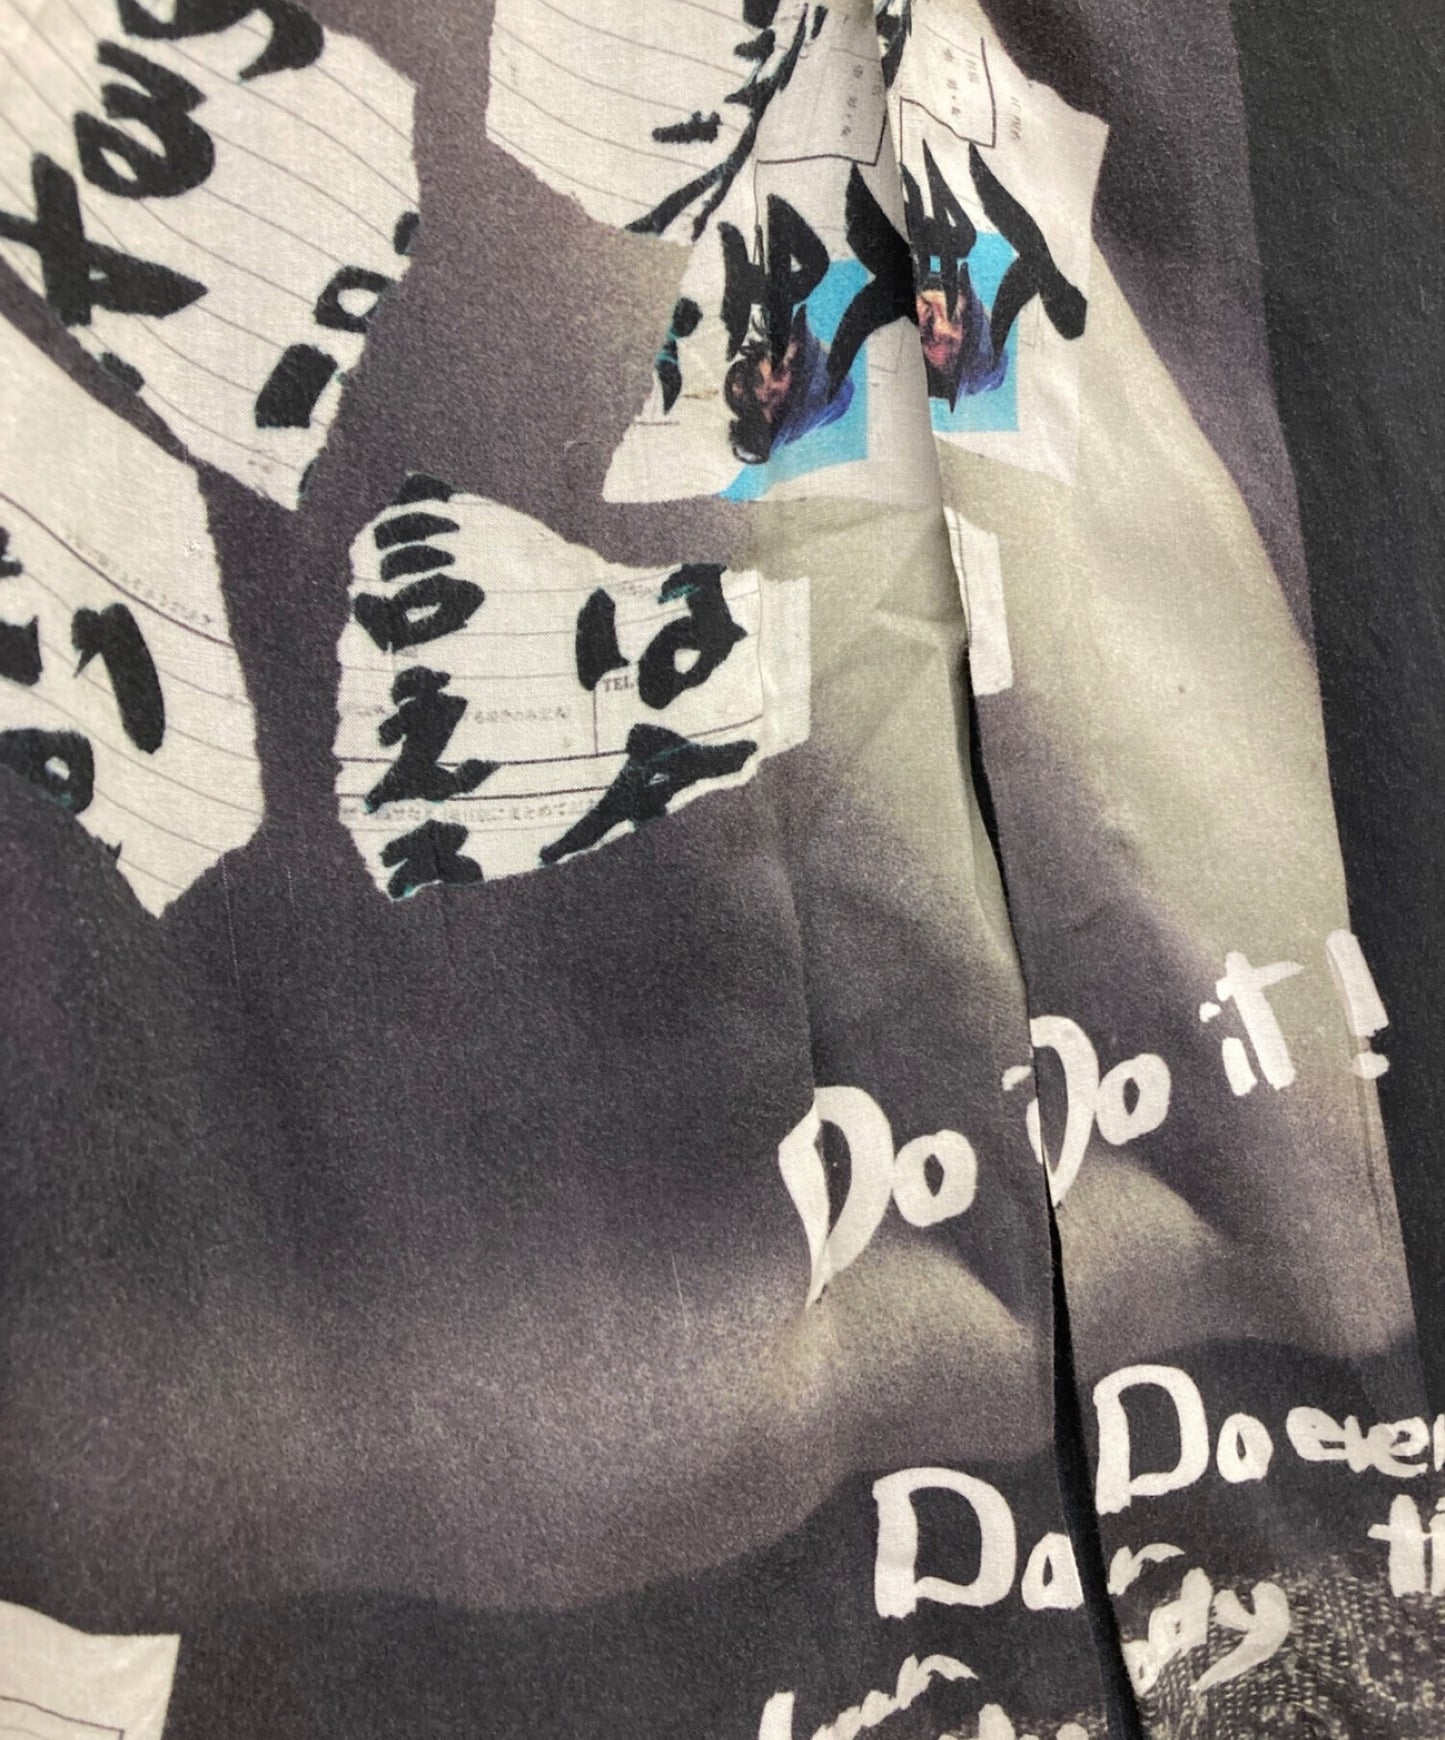 [Pre-owned] Yohji Yamamoto pour homme 19SS Do it all and die long shirt HH-B40-222